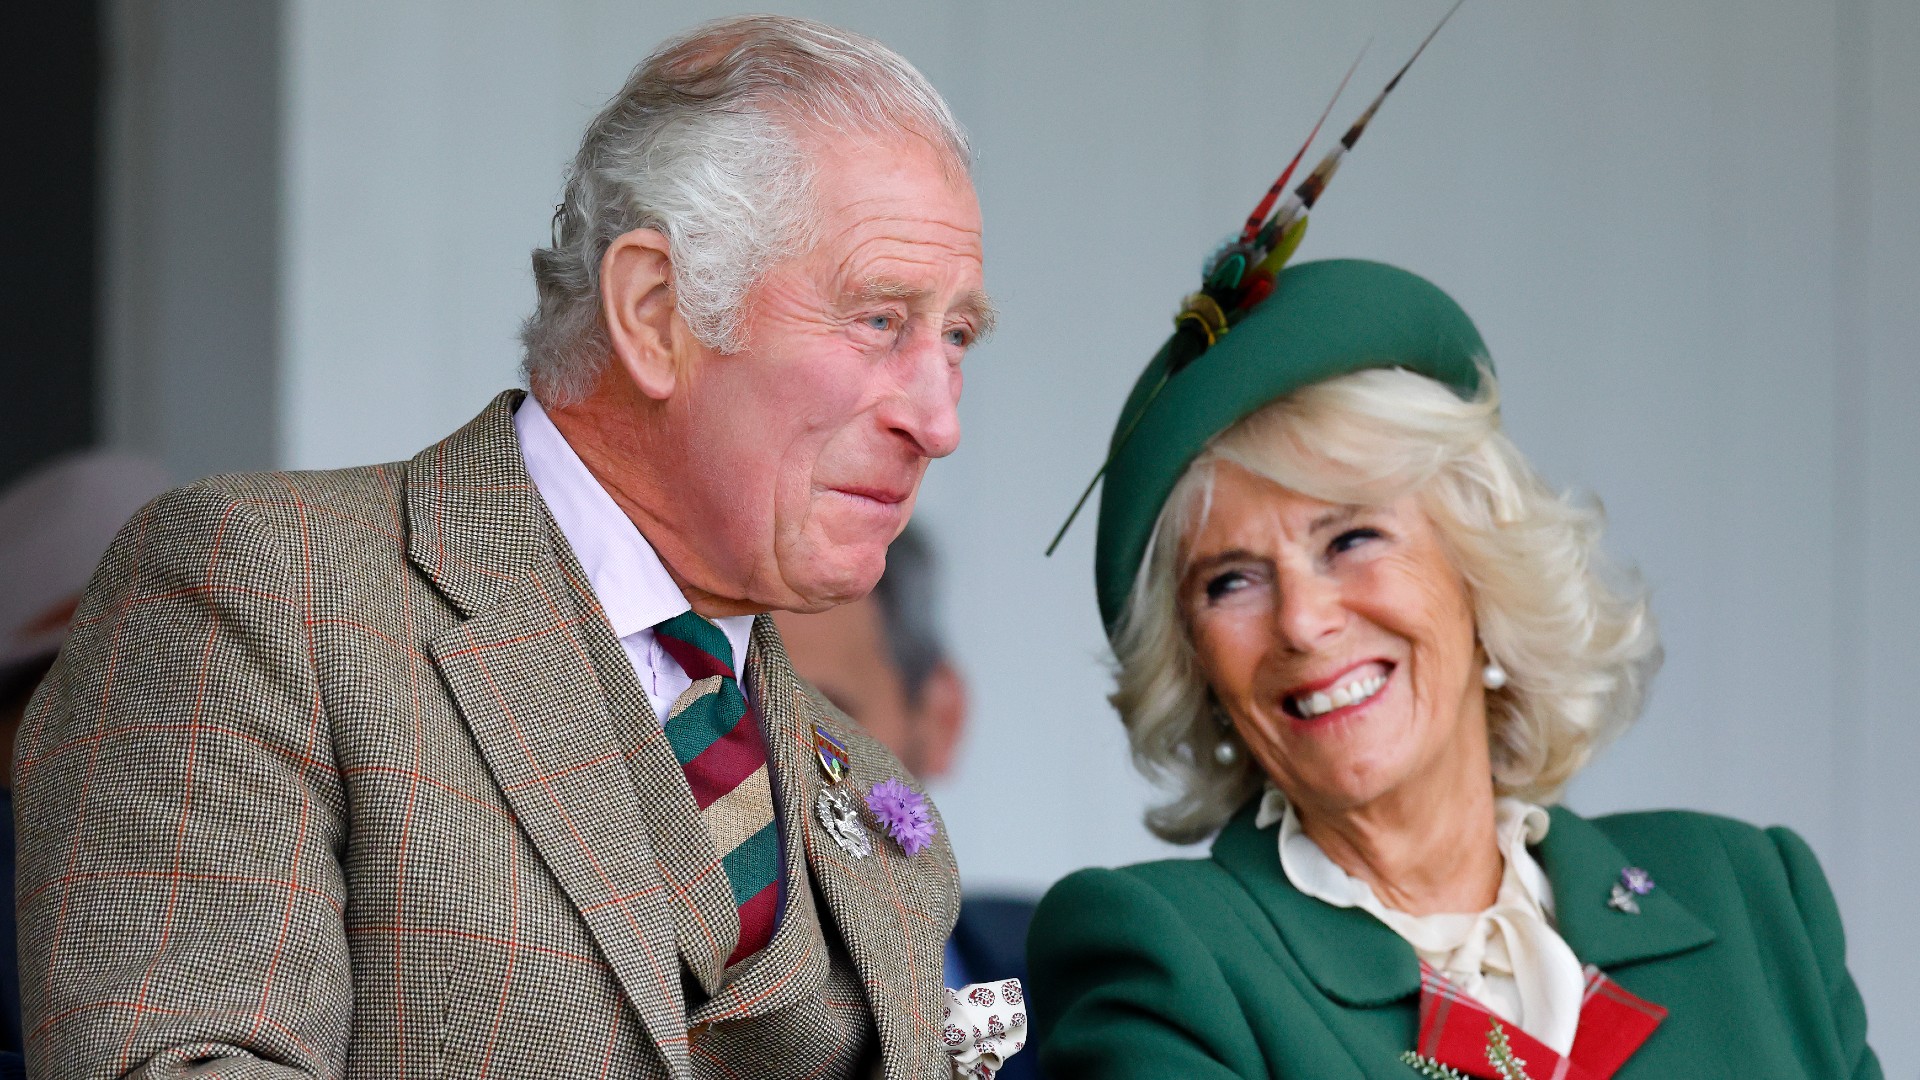 Camilla “Spat Out Tea” When Prince Harry Suggested a Mediator Help Resolve Family Drama